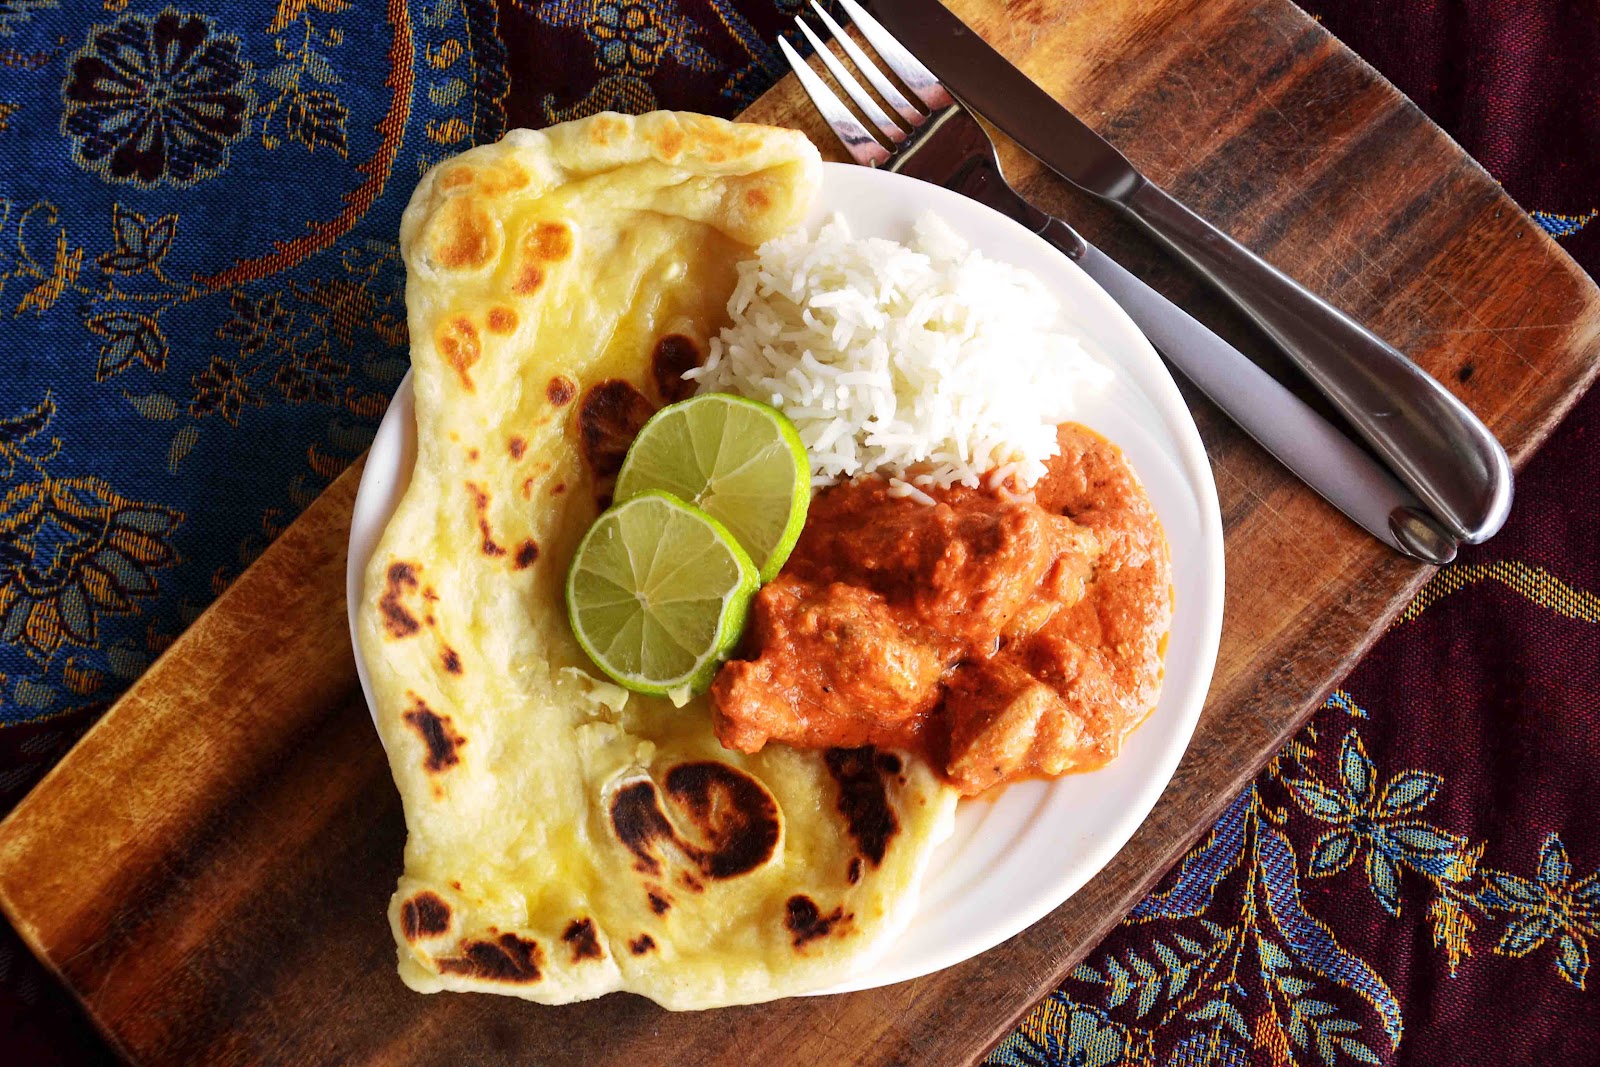 The eccentric Cook: Chicken Tikka Masala with Buttered Naan